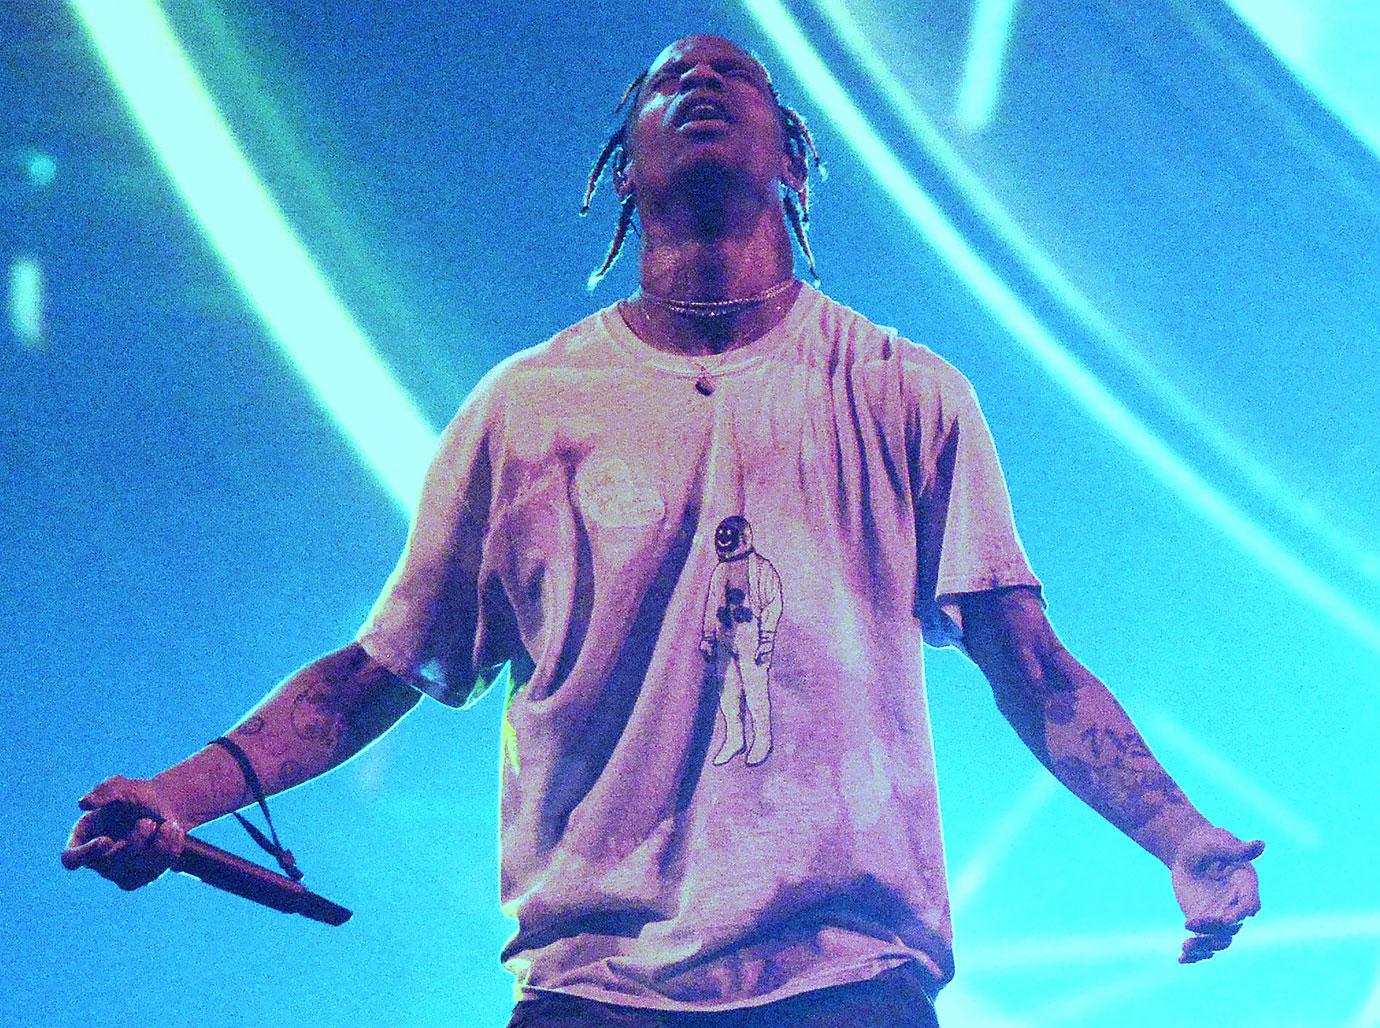 Travis Once Spat At A Fan, Incited Crowd To Hit Him